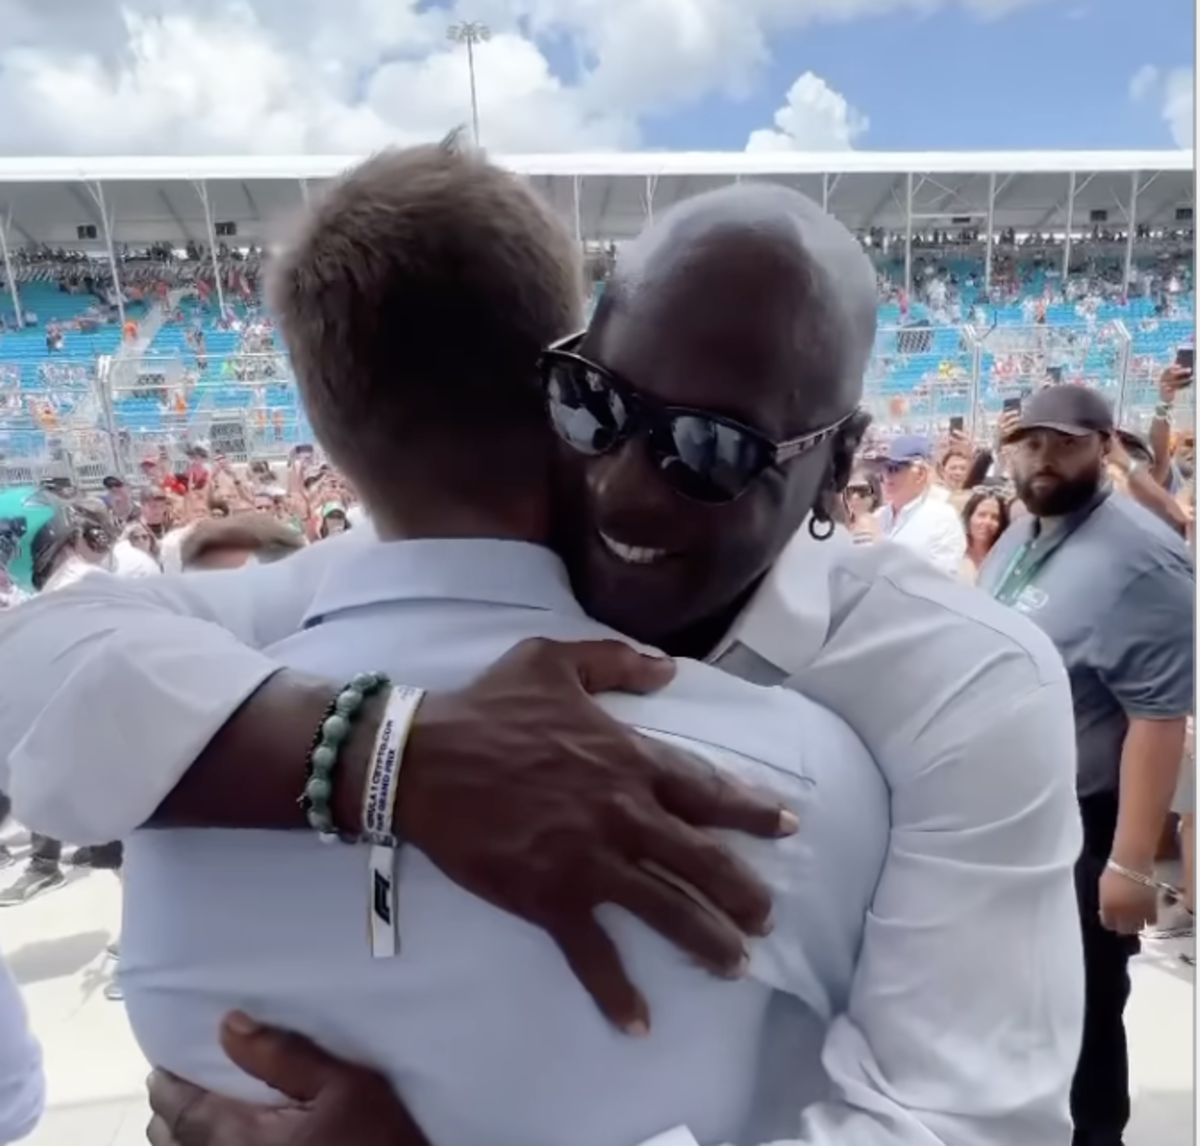 NBA Fans Go Crazy After Michael Jordan Hugs Tom Brady At Miami Grand Prix: "The Greatness In That Hug Is Unmatched."